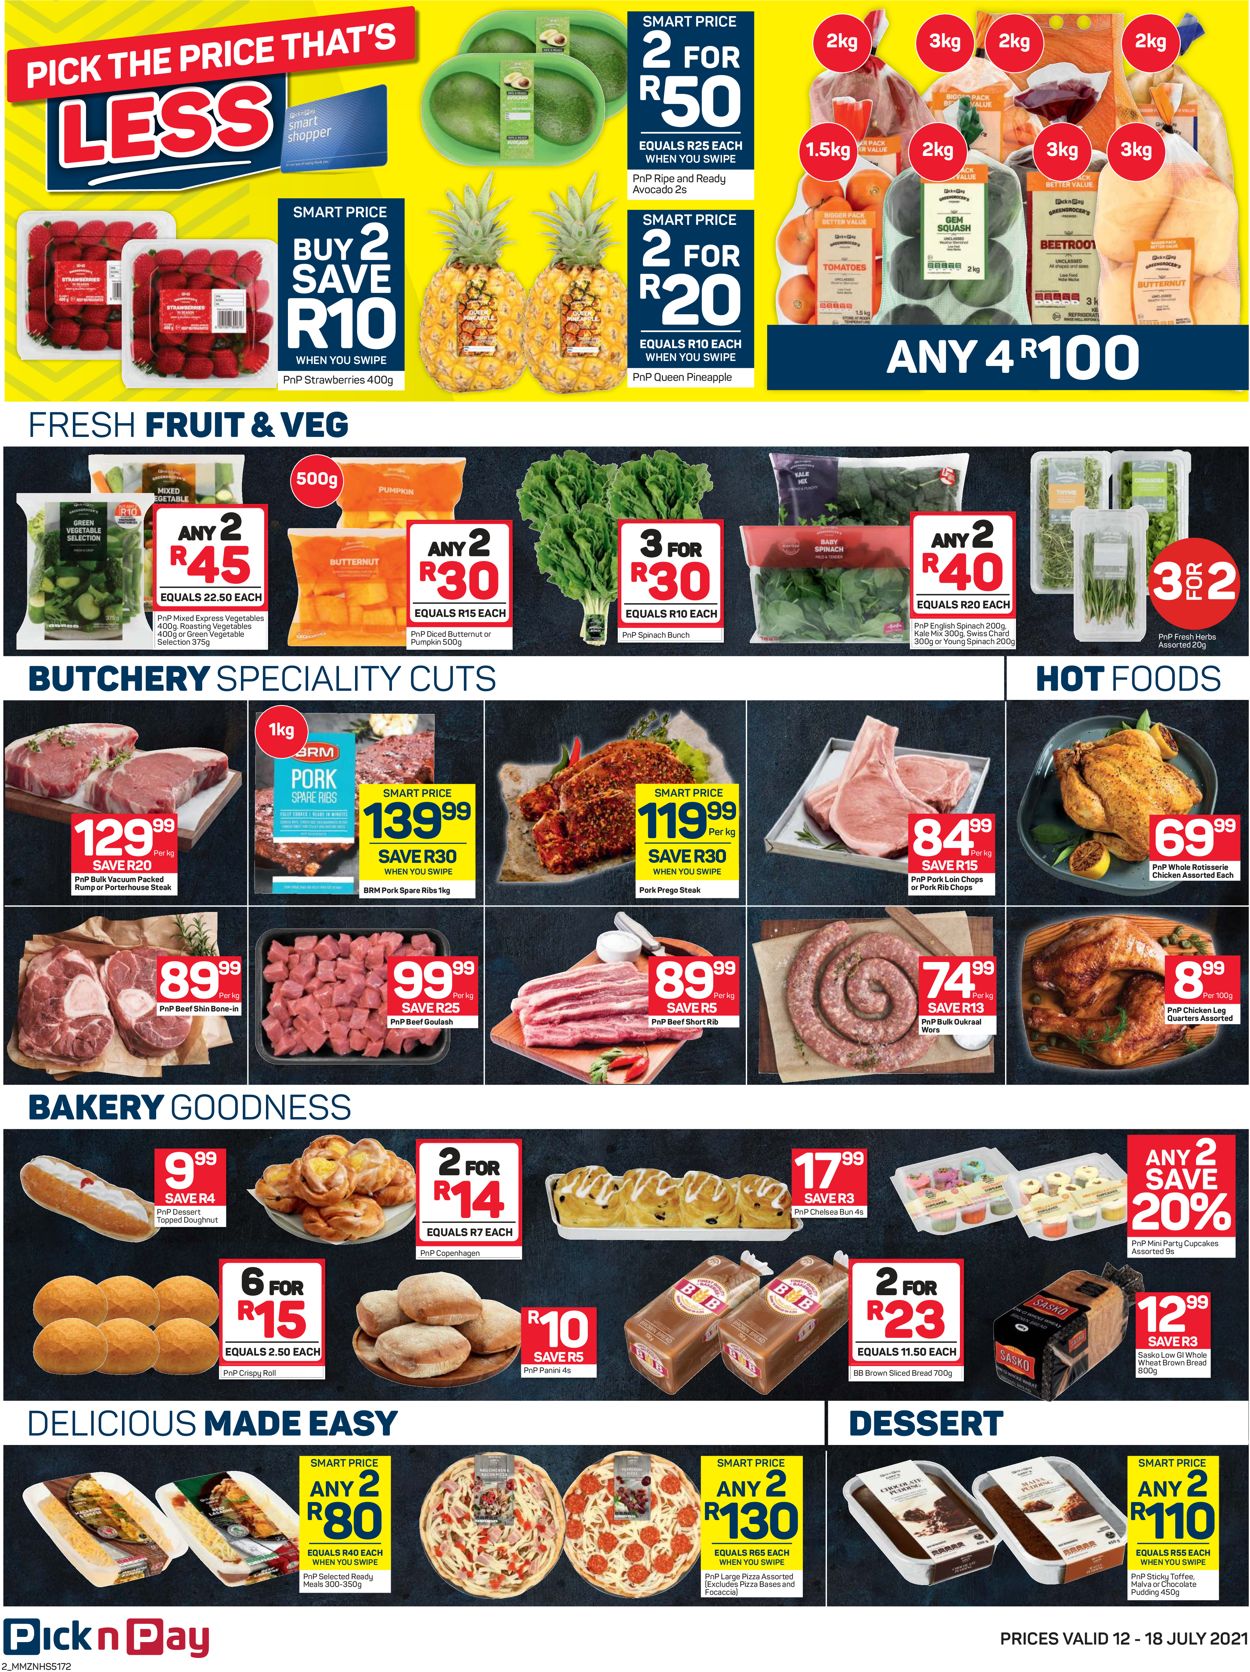 Pick n Pay Catalogue - 2021/07/12-2021/07/18 (Page 2)